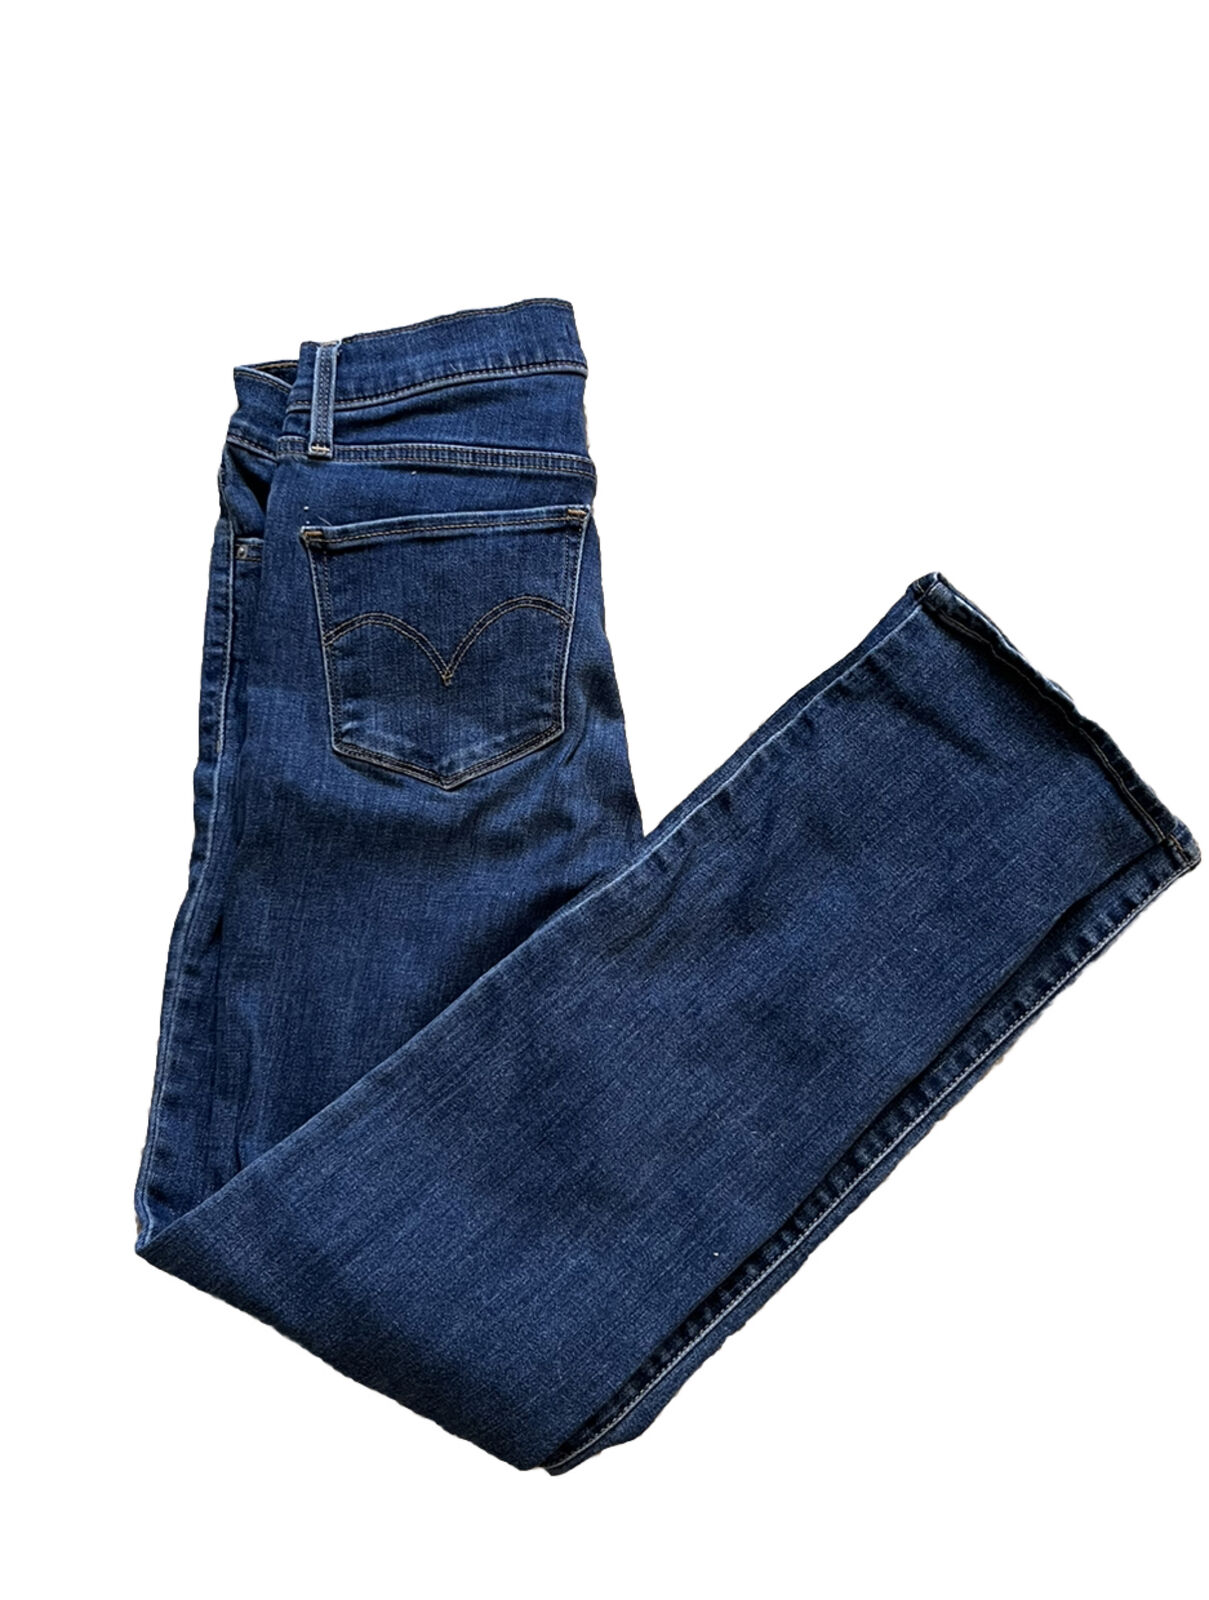 514 Levis Shaping Straight Blue Stretch Jean Sz 4 - image 4